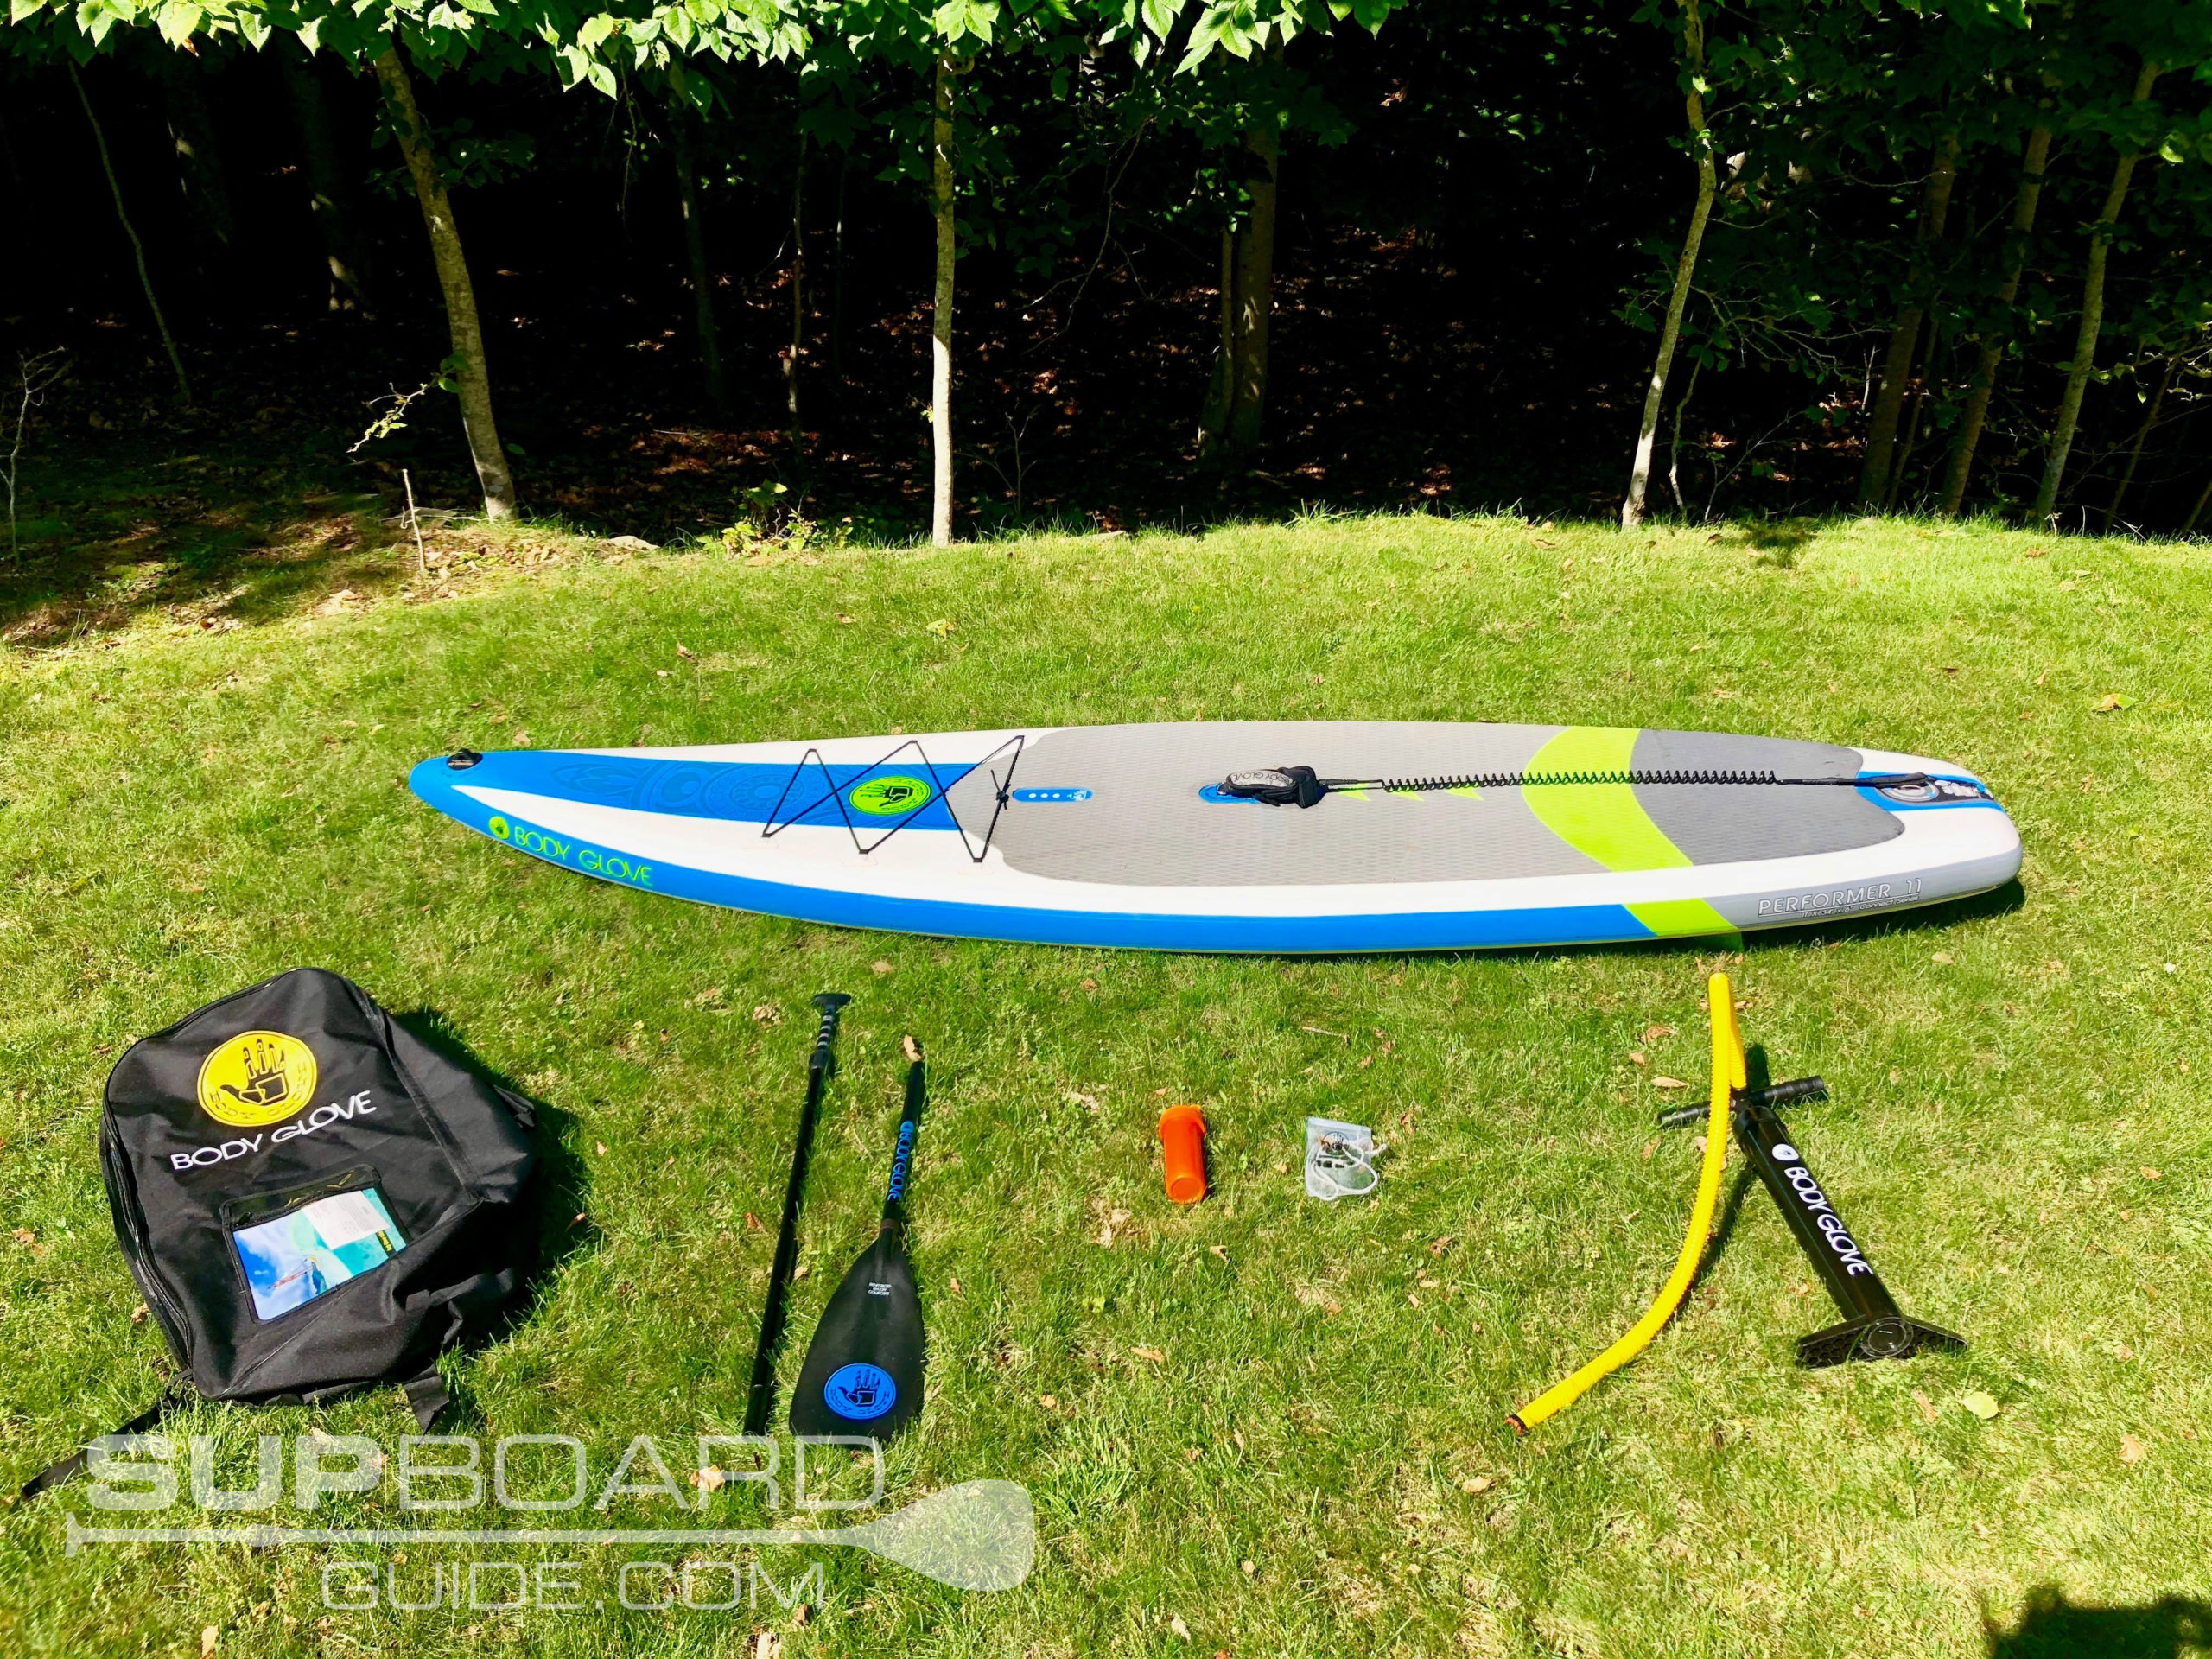 Bodyglove SUP Board Review